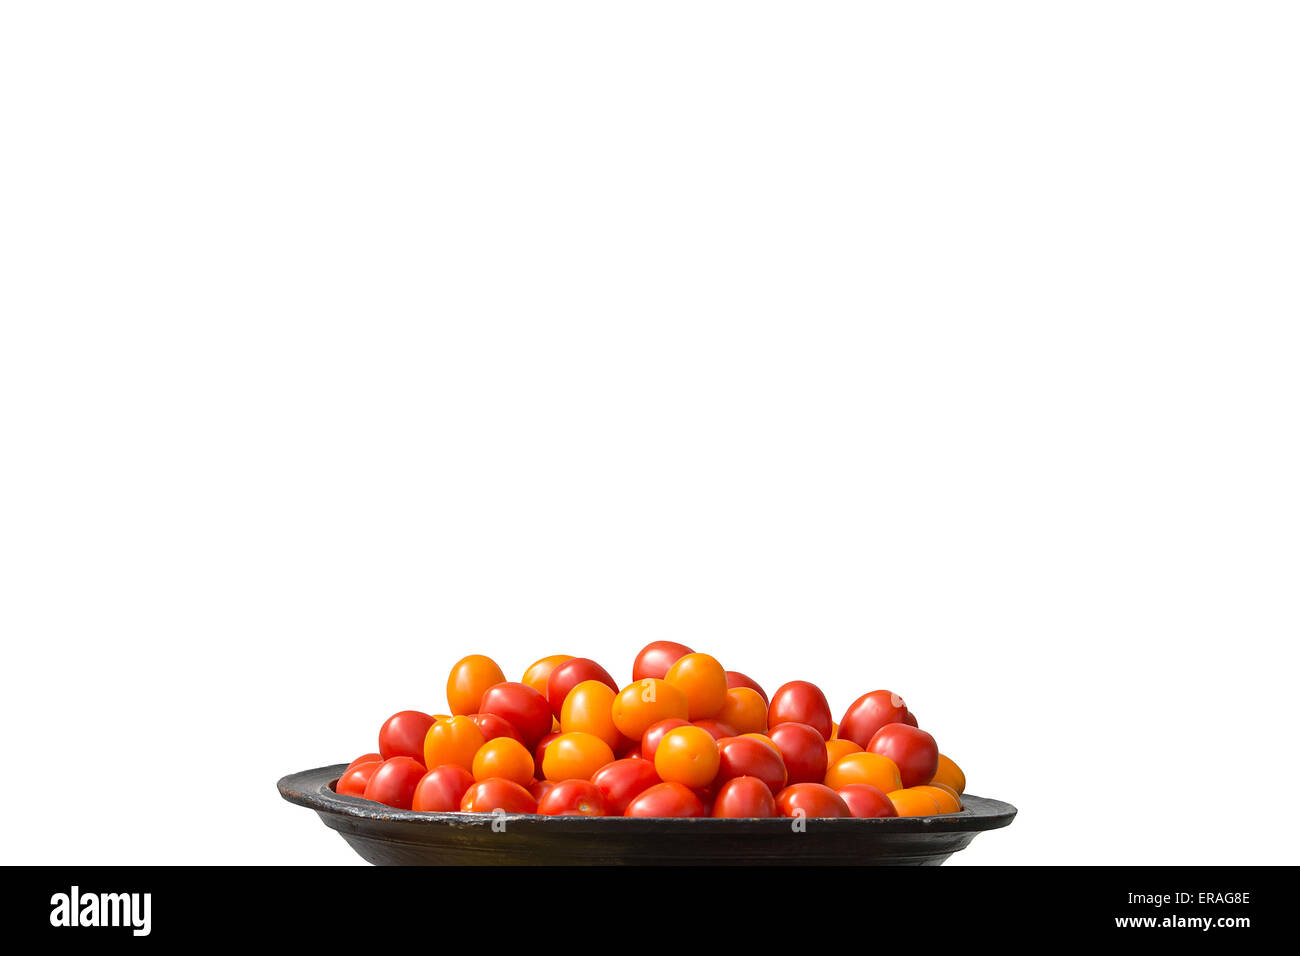 Tomatoes red and yellow on large plate isolated on white. Stock Photo